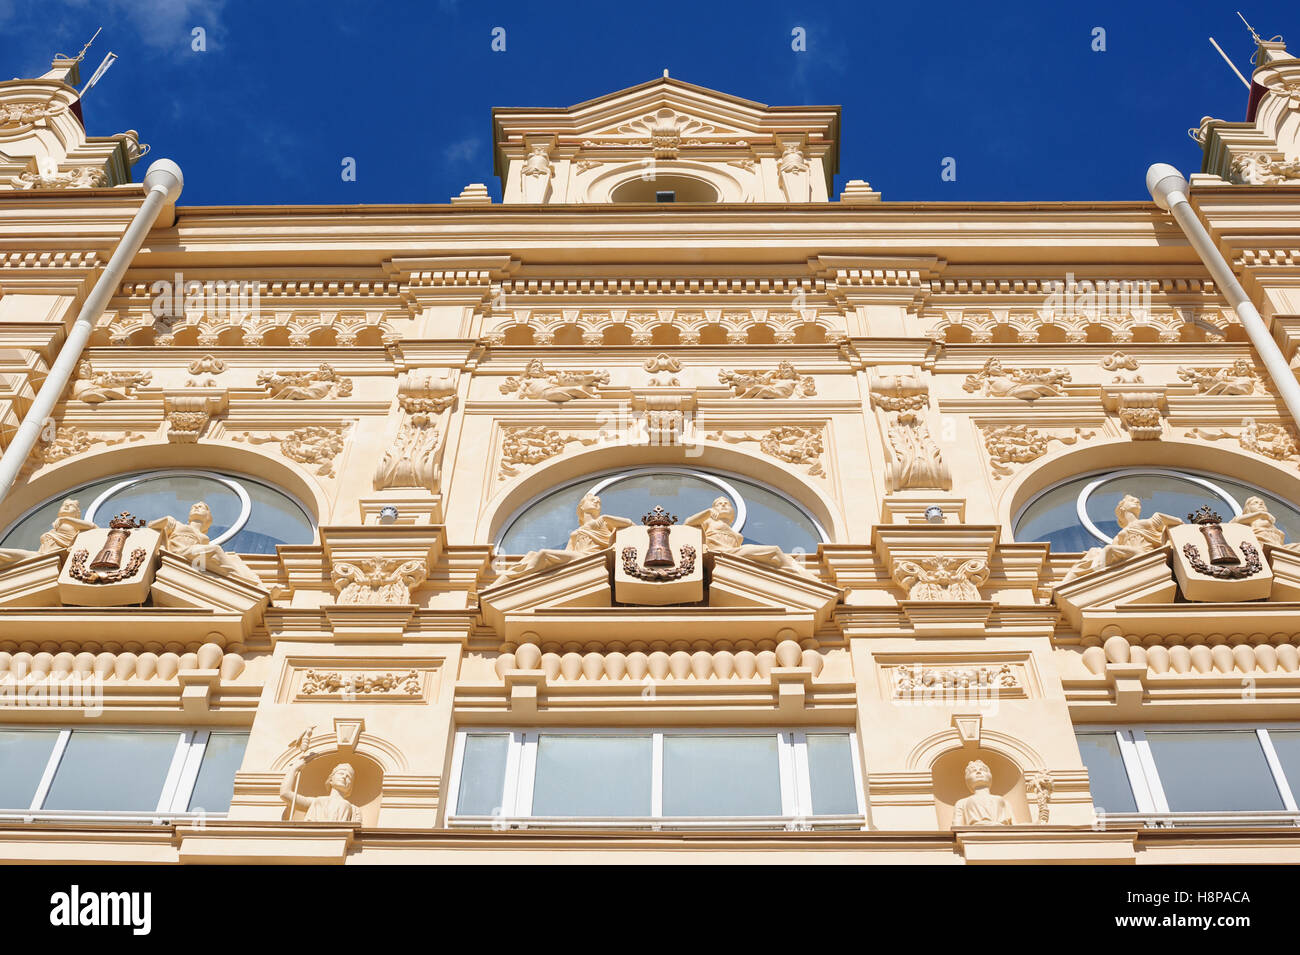 architectural facade of the old building in the city Stock Photo